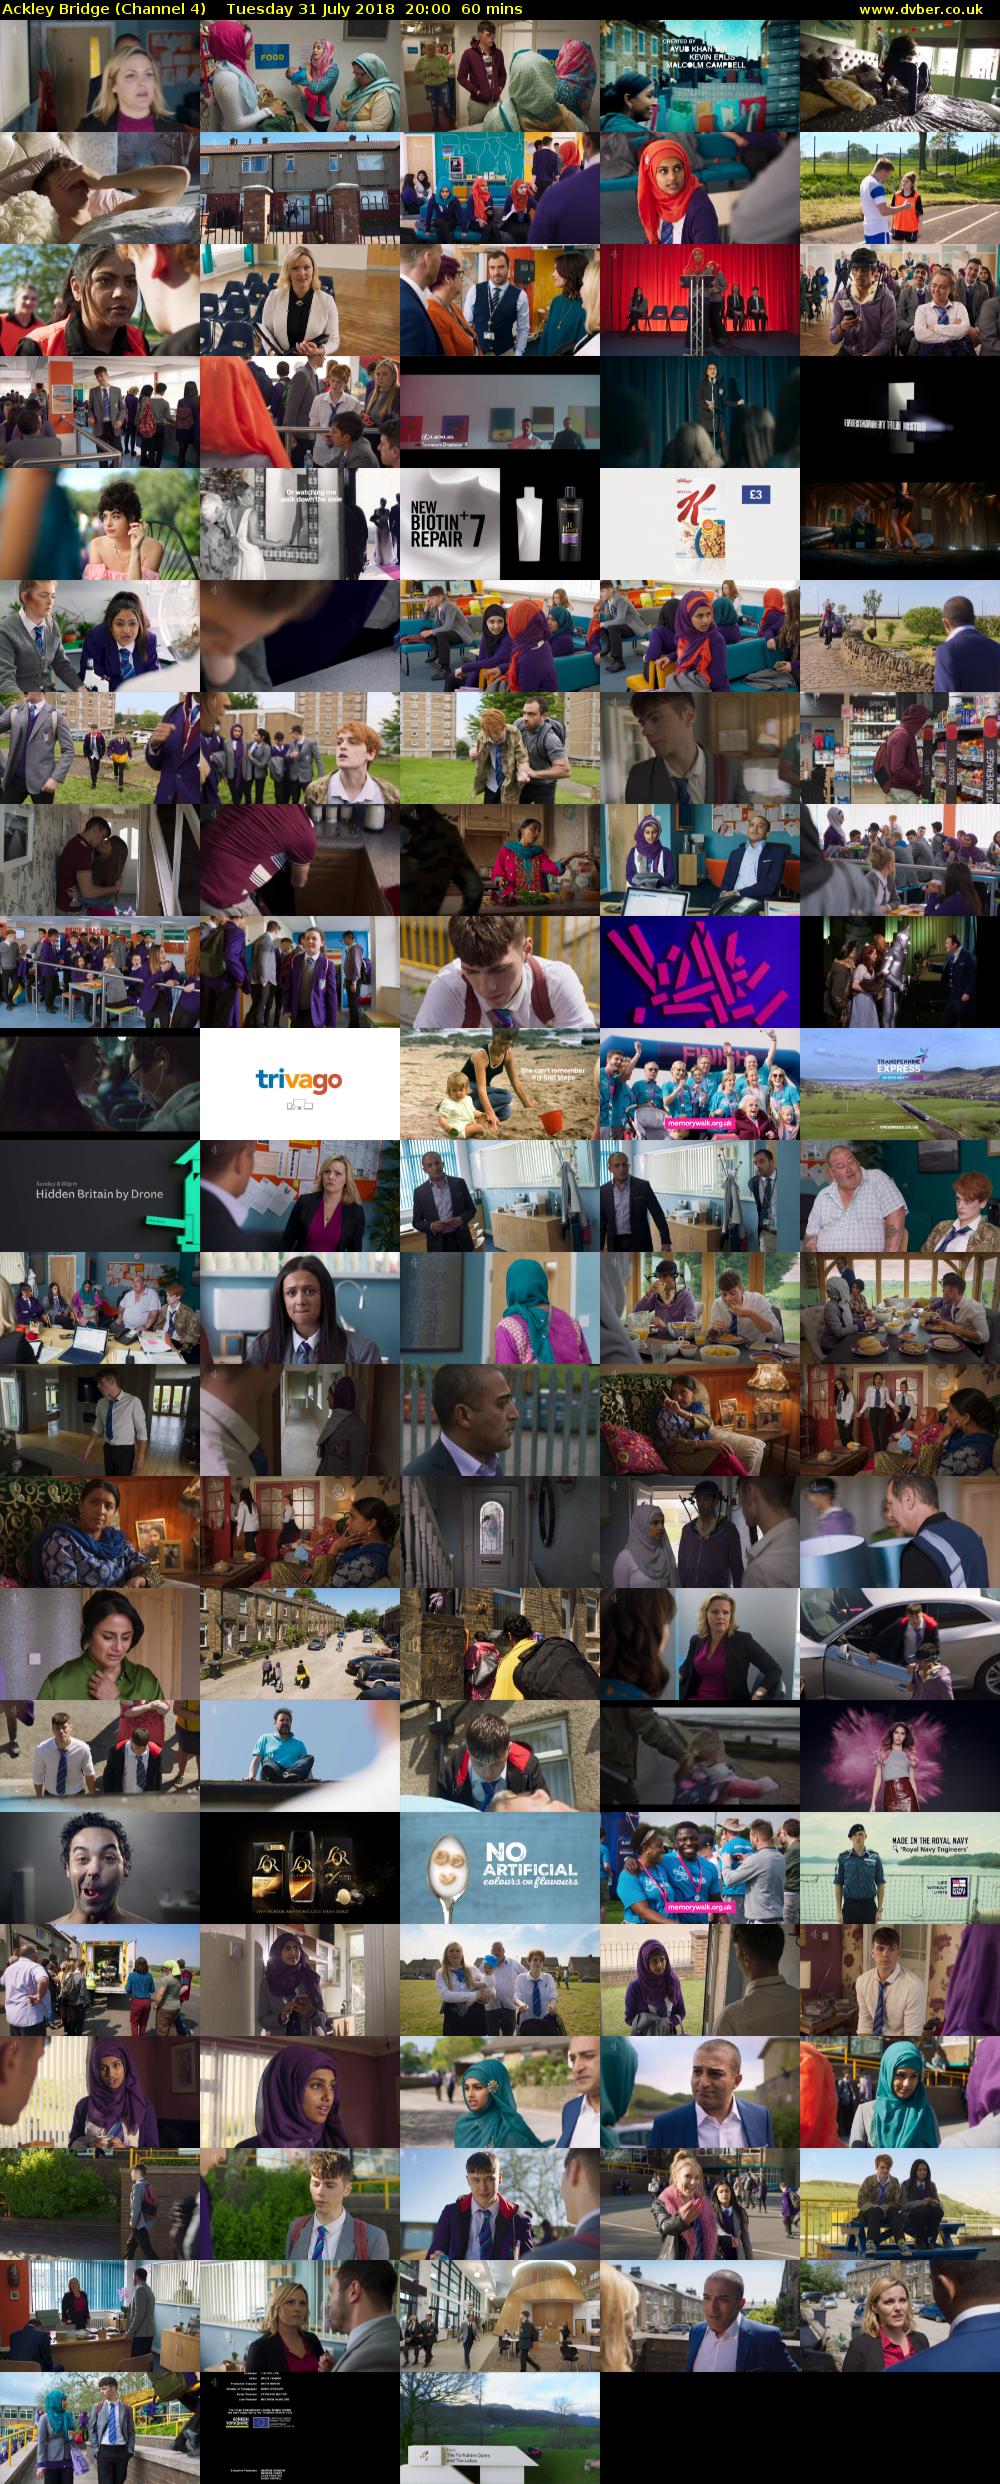 Ackley Bridge (Channel 4) Tuesday 31 July 2018 20:00 - 21:00